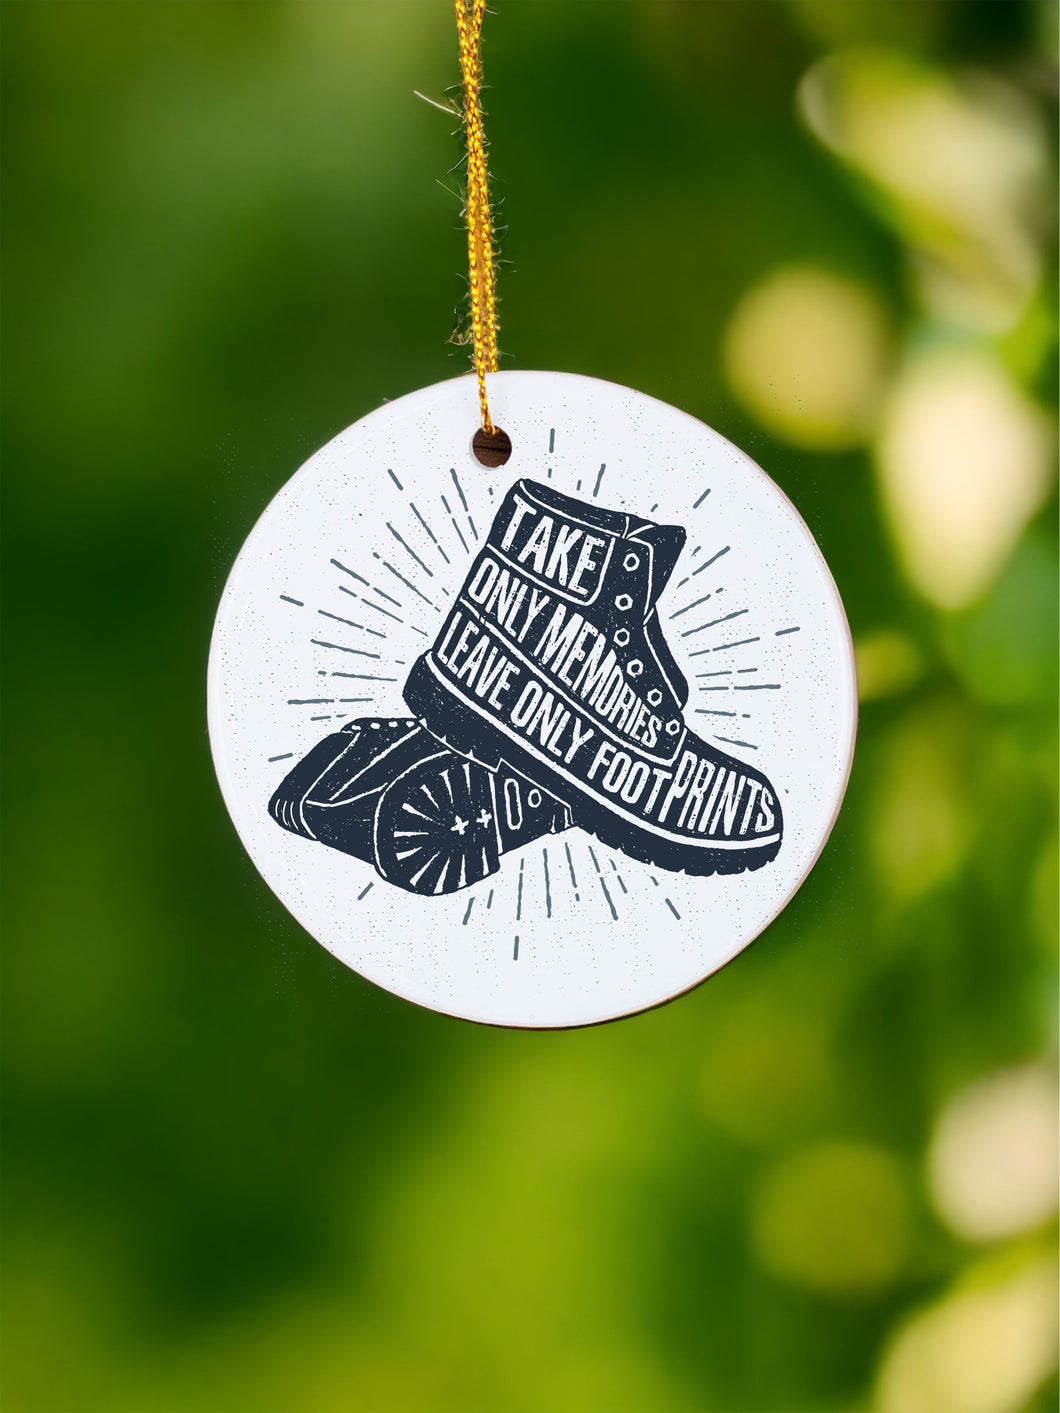 Take only memories leave only footprints - Ceramic Ornament